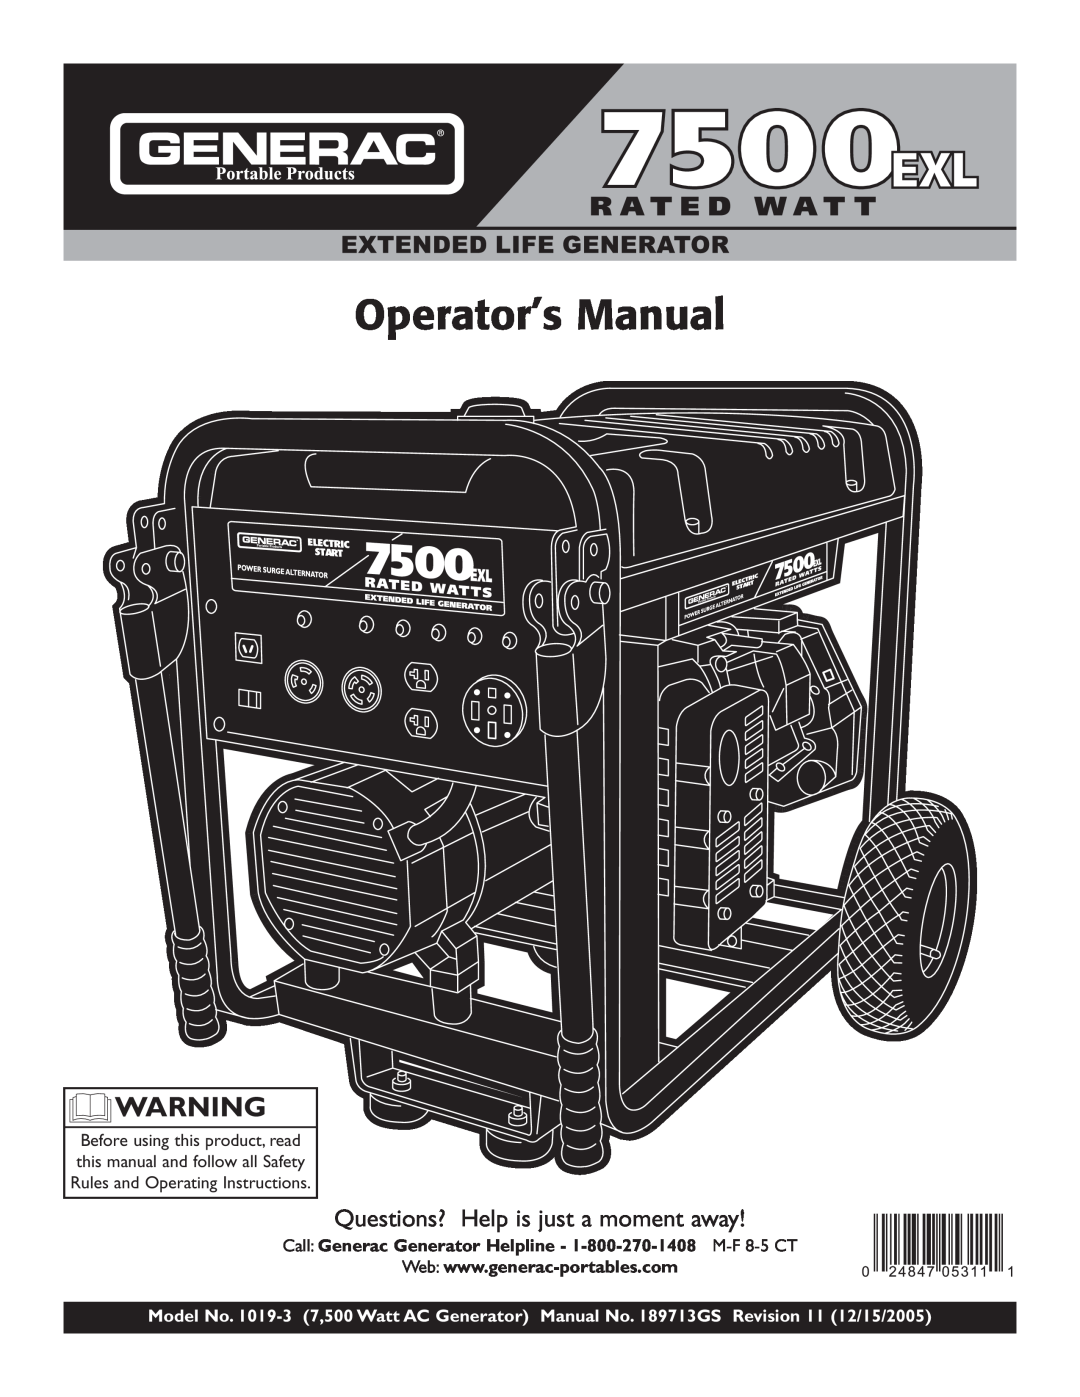 Generac 101 9-3 operating instructions Questions? Help is just a moment away, Operator’s Manual 